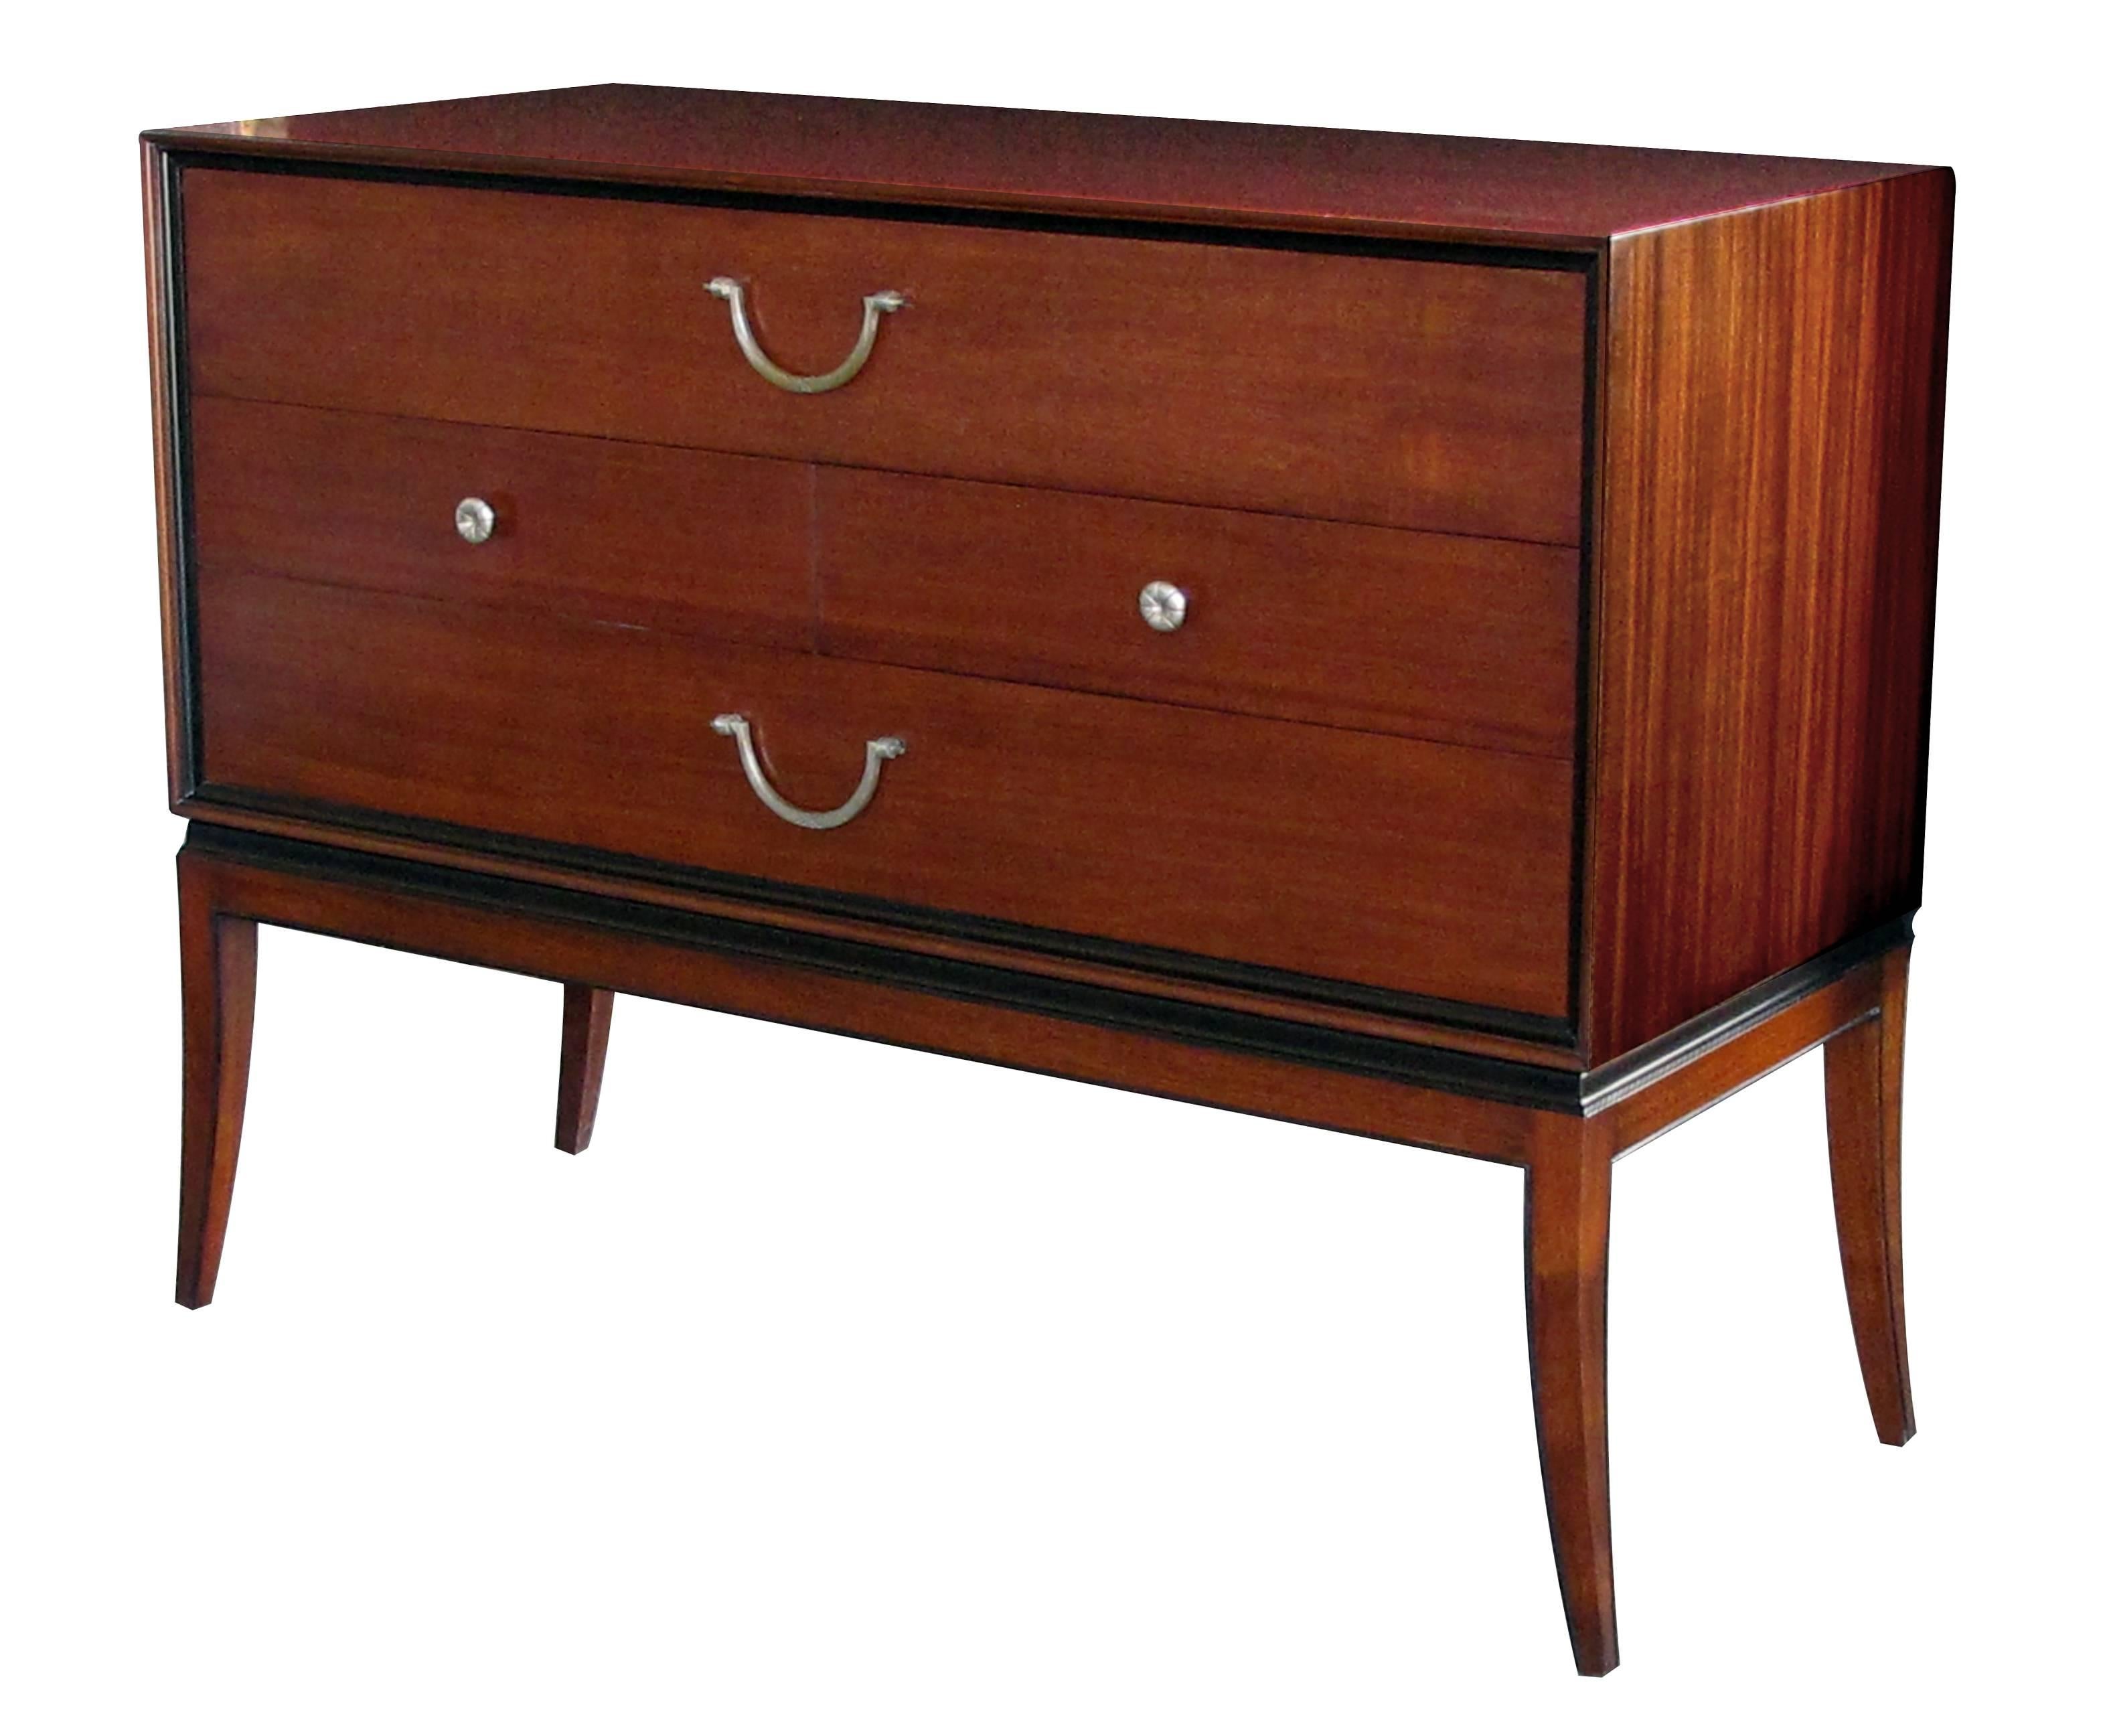 An extremely good quality Tommi Parzinger designed for Charak Modern Mid-Century mahogany four-drawer cabinet/chest with ebonized highlights; Tommi Parzinger at his best with its clean lines and tailored look, all in a rich ribbon mahogany and